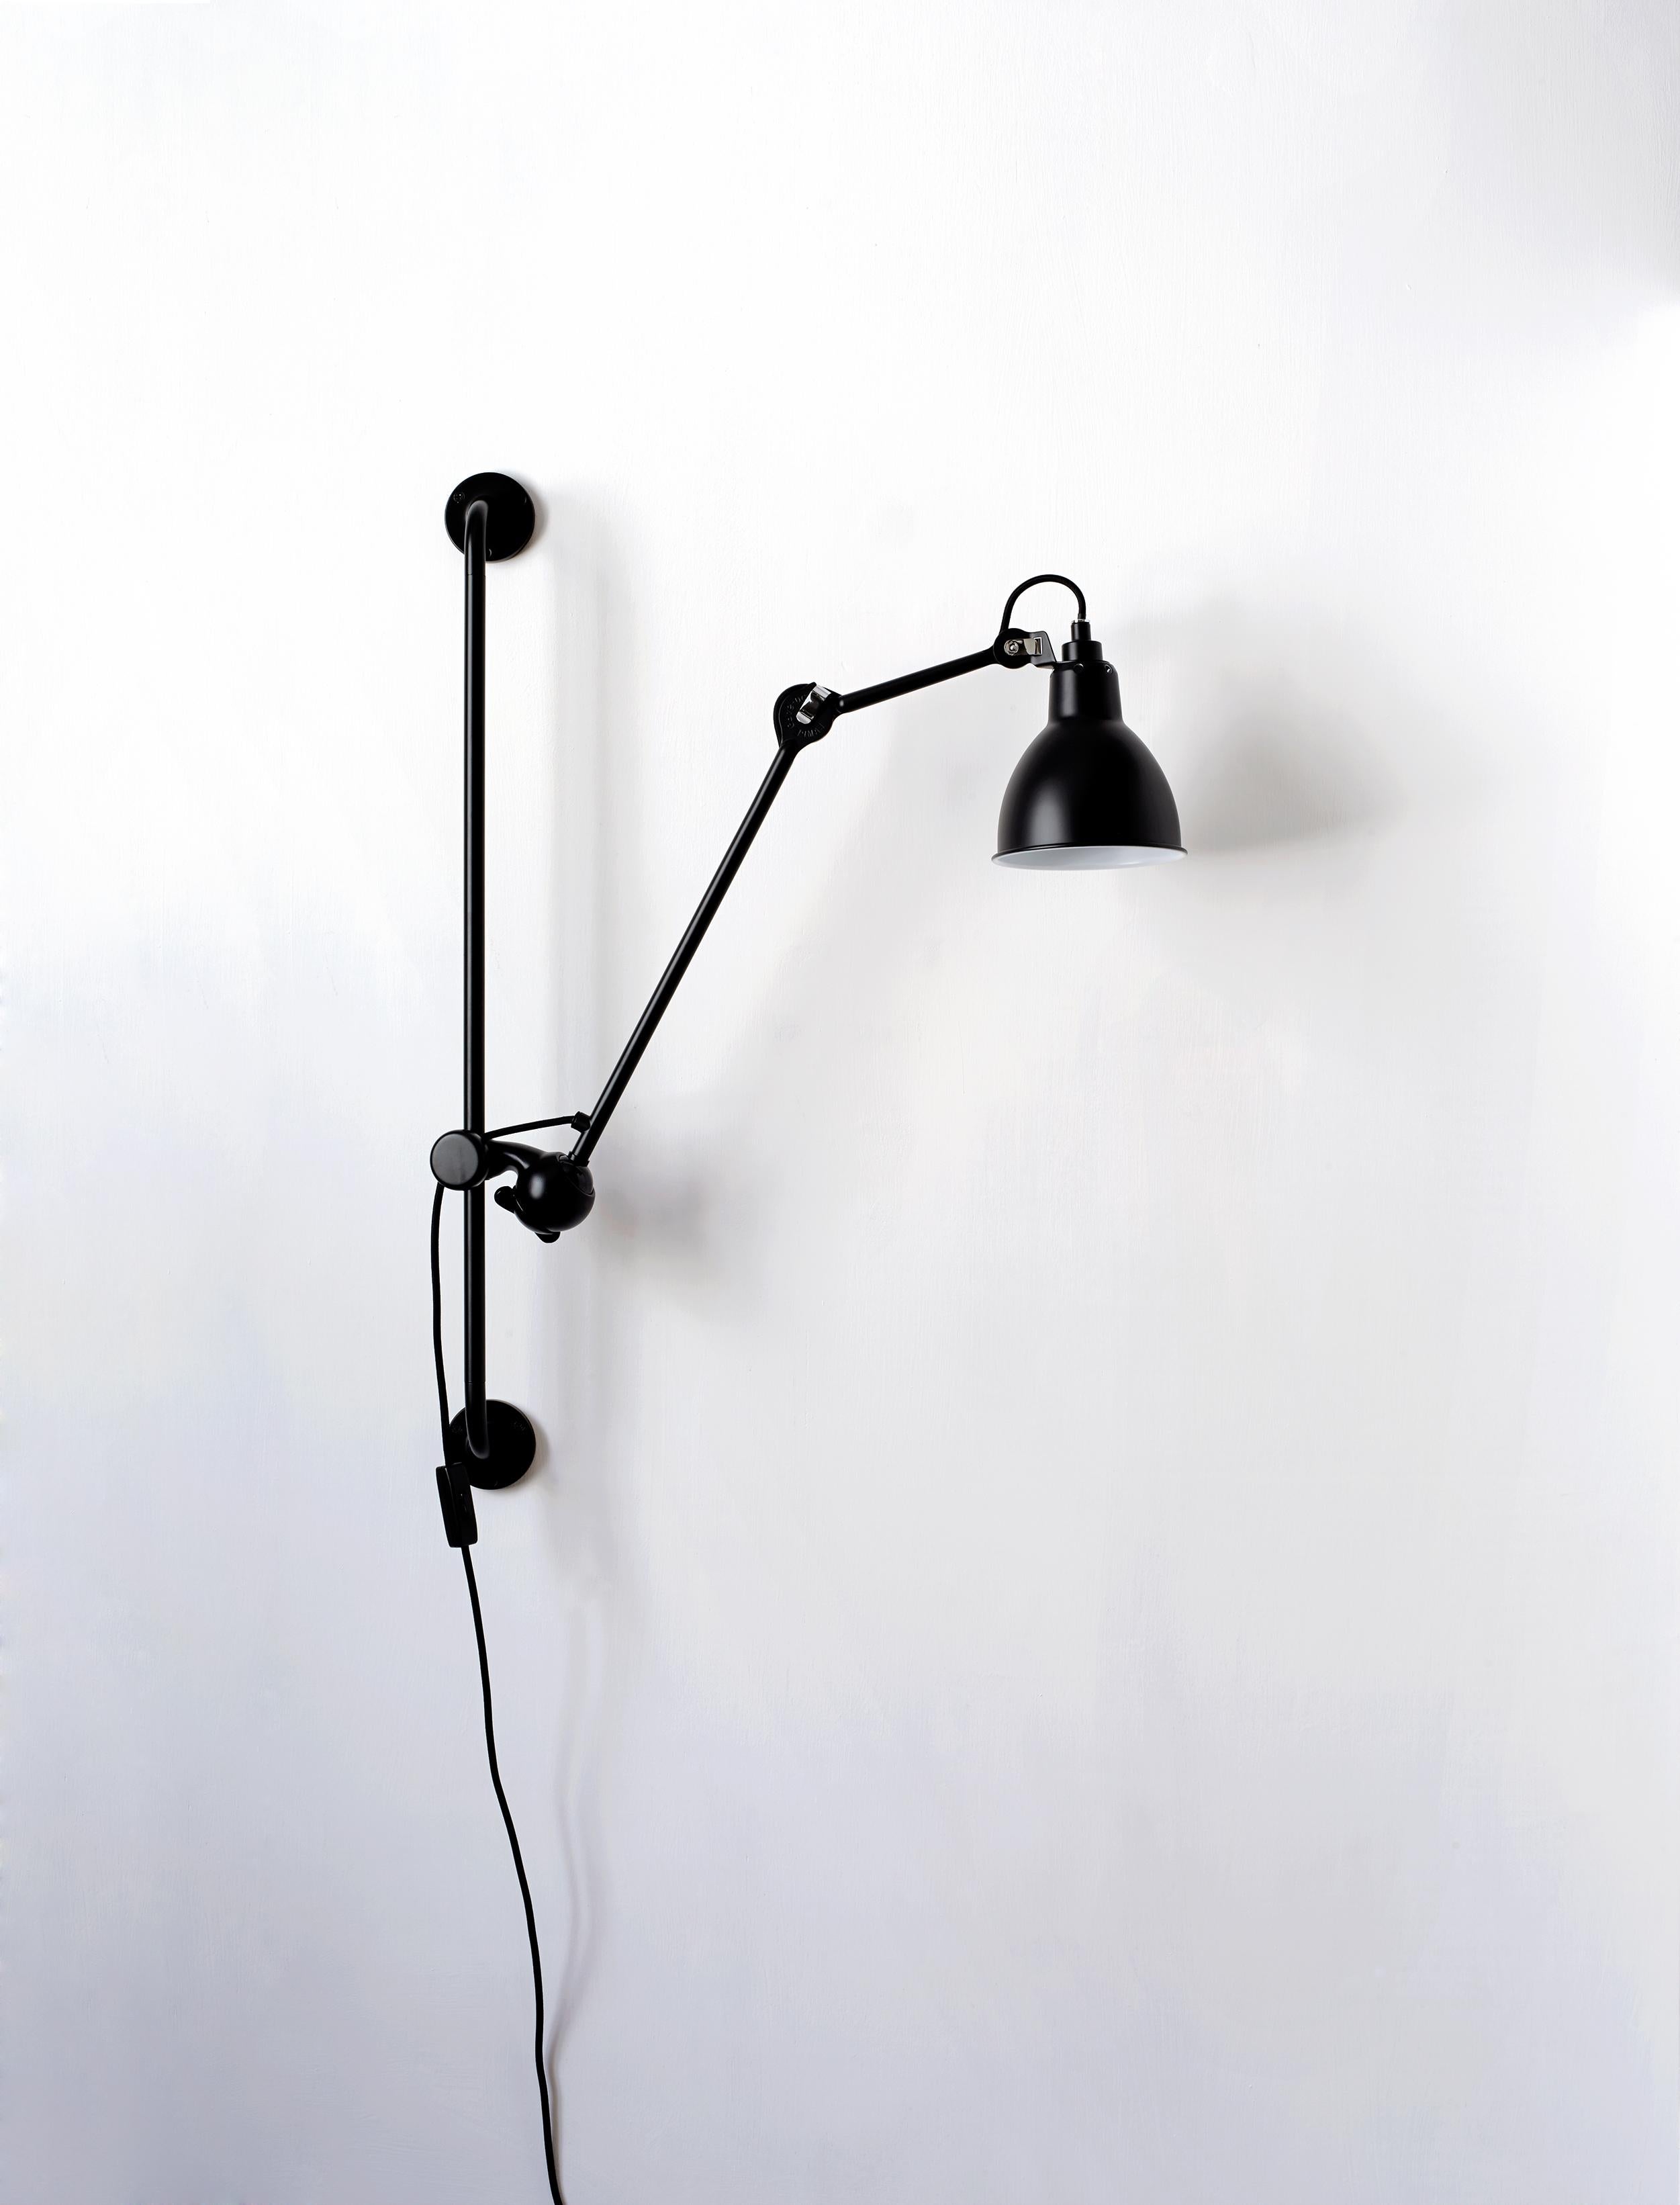 1921, before ever becoming a design, the GRAS Lamp started out as an idea. It is the first articulated lamp in the history of lighting. Invented specifically as a light for working by, nowadays it fits seamlessly into any domestic environment.
Form